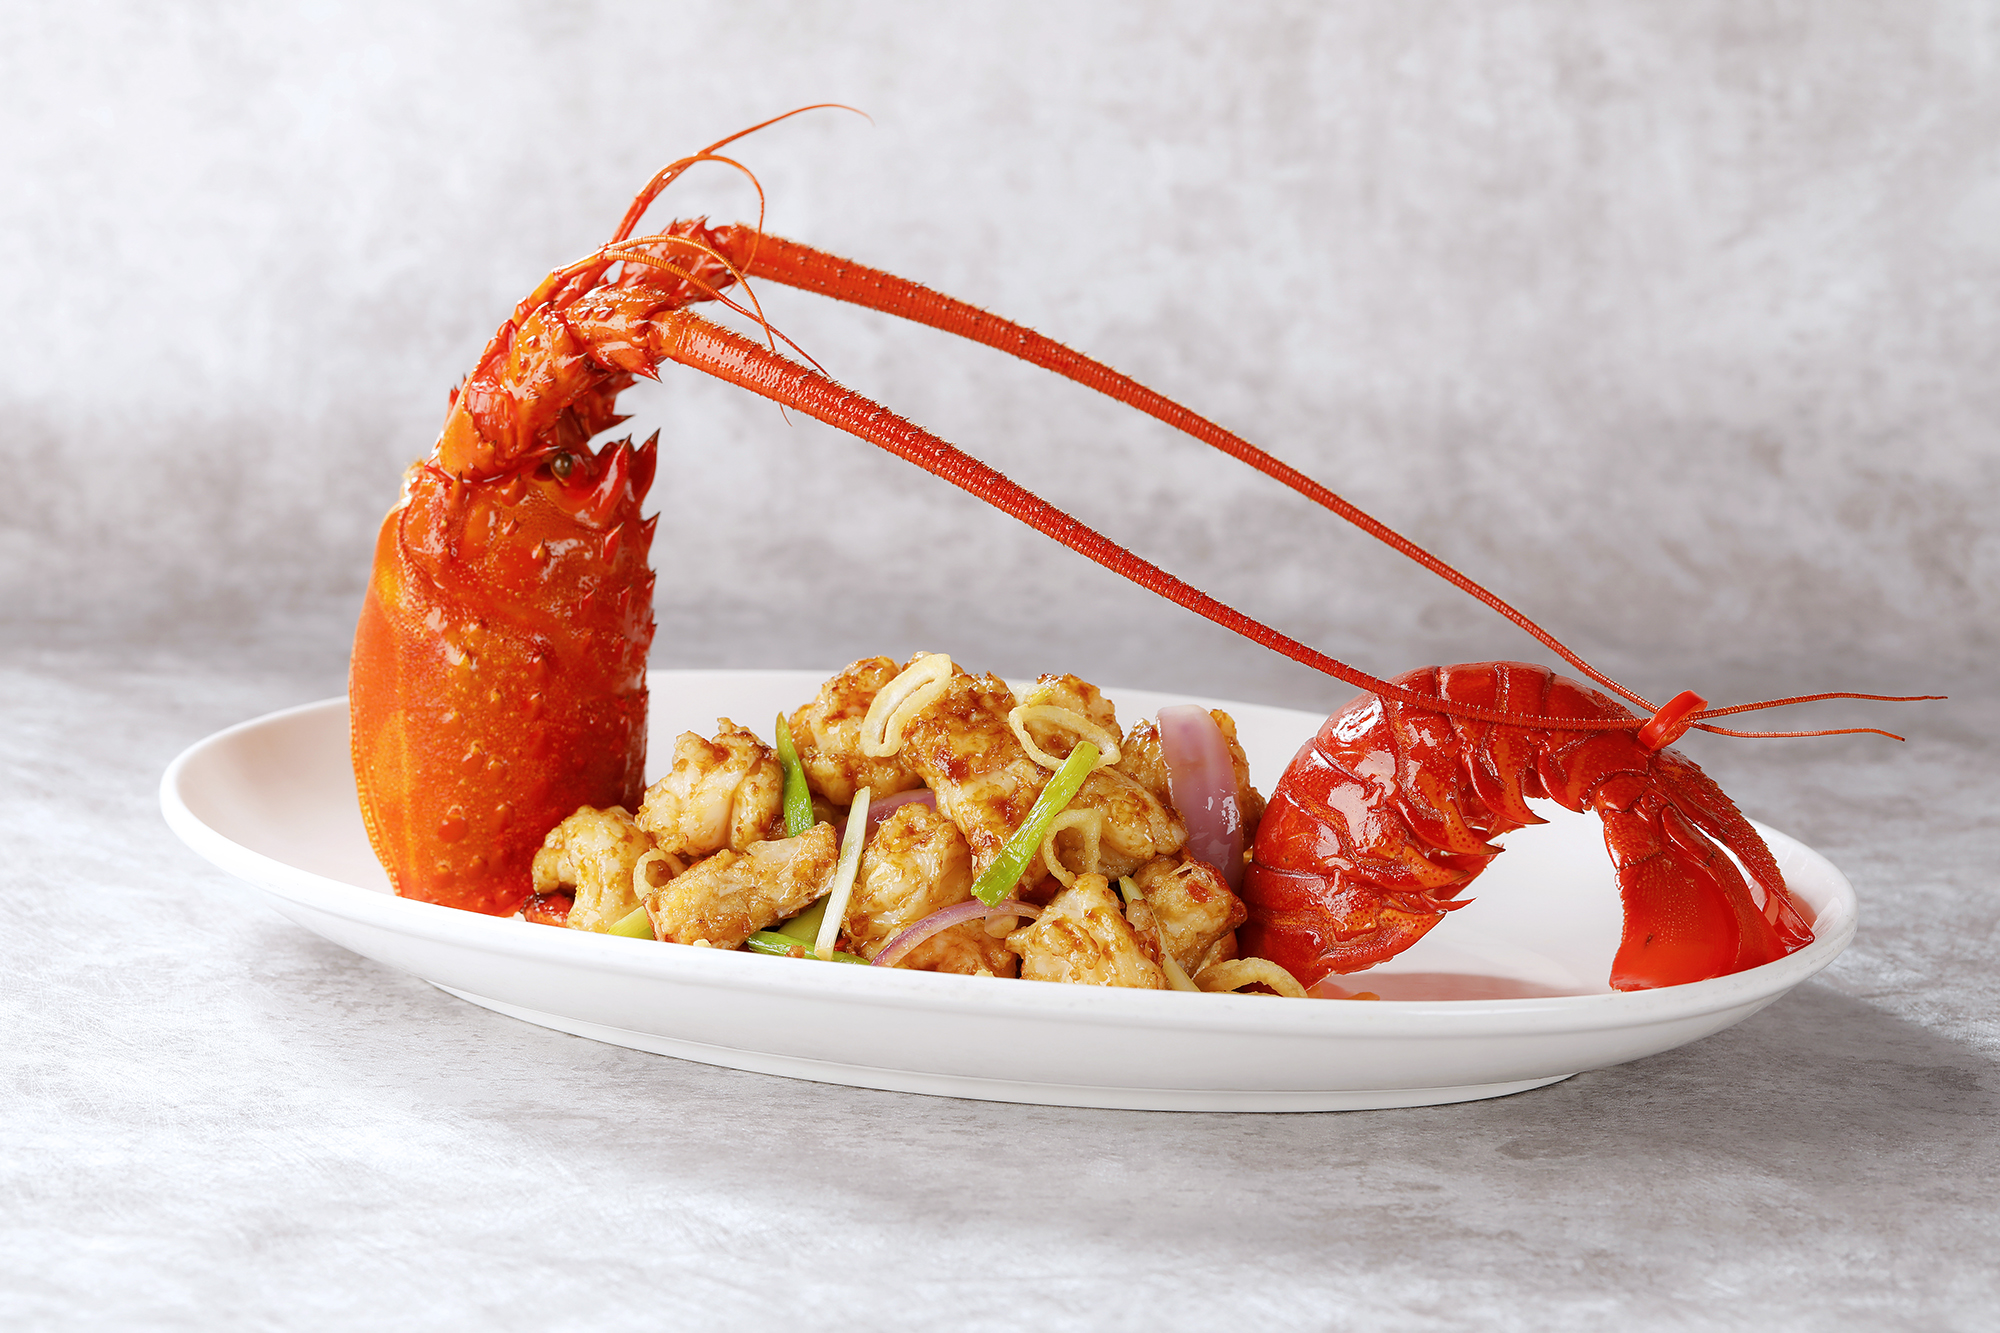 tlhak-tang-court-stir-fried-fresh-lobster-with-onions-and-shallots.jpg